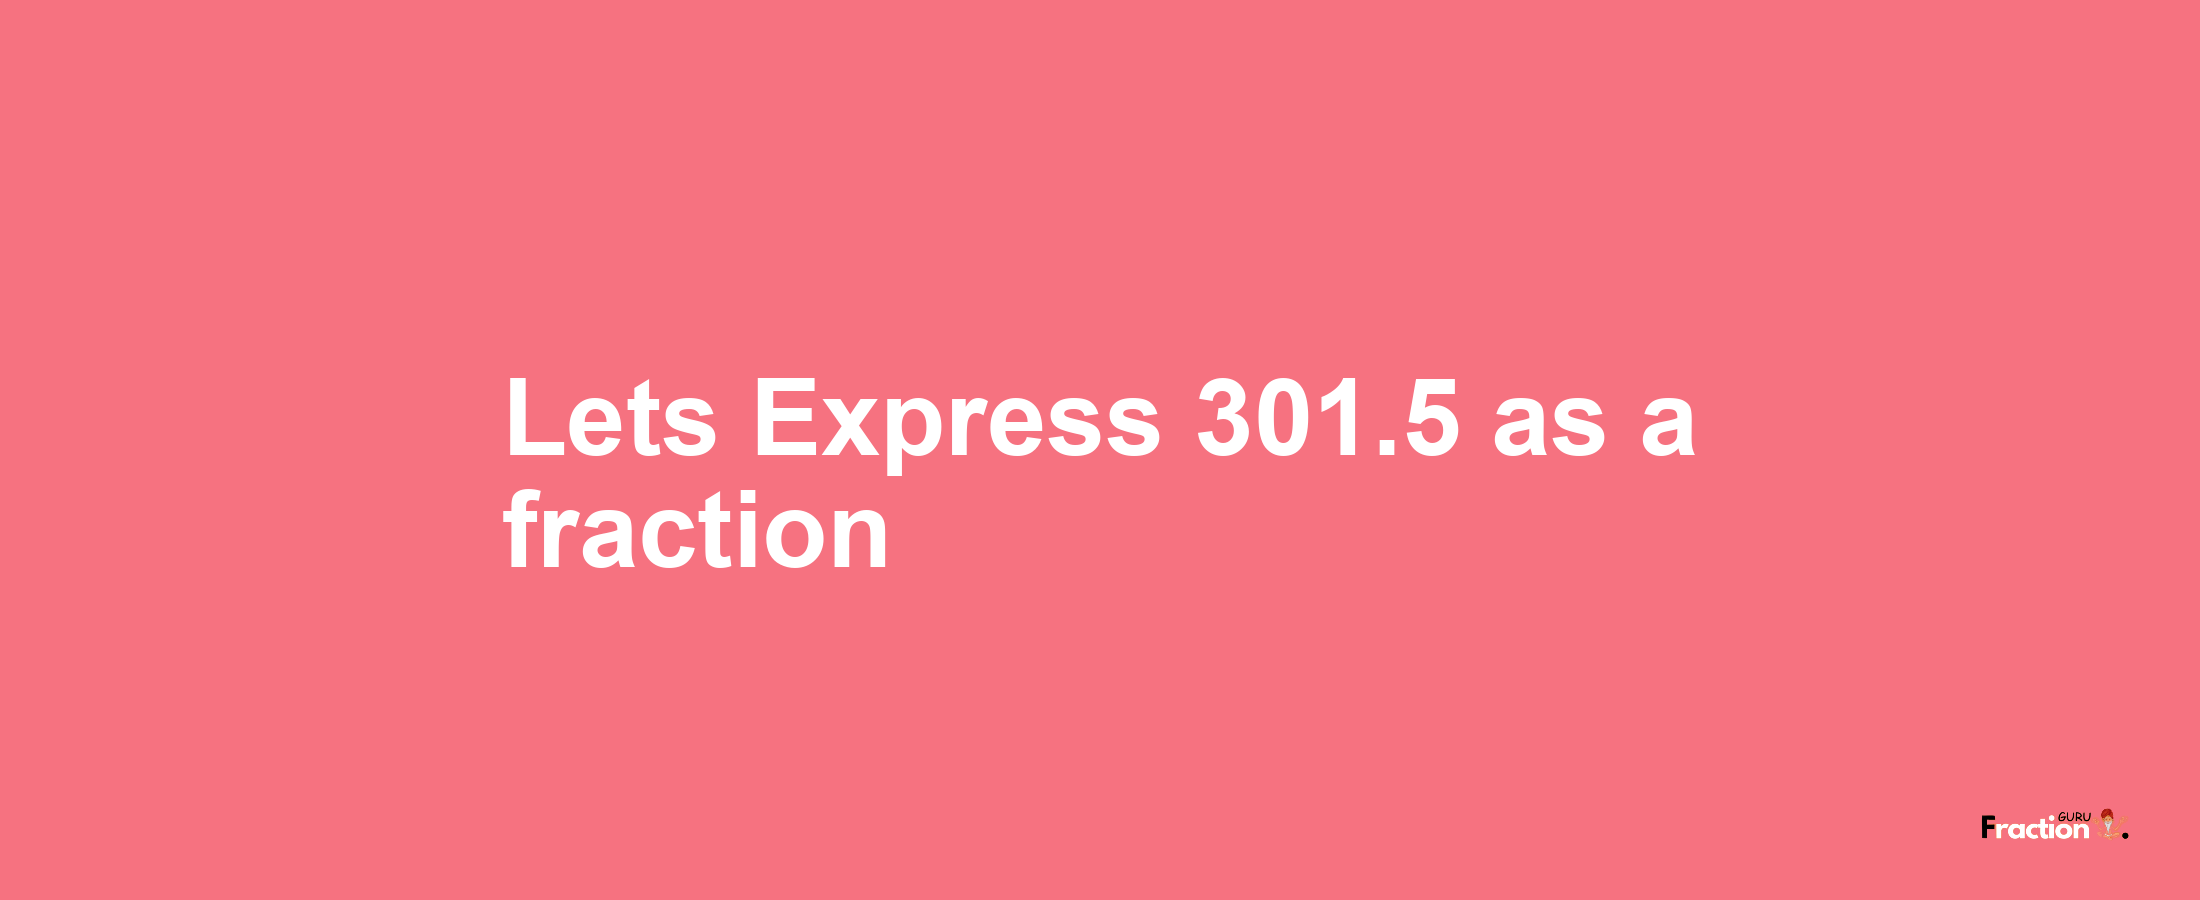 Lets Express 301.5 as afraction